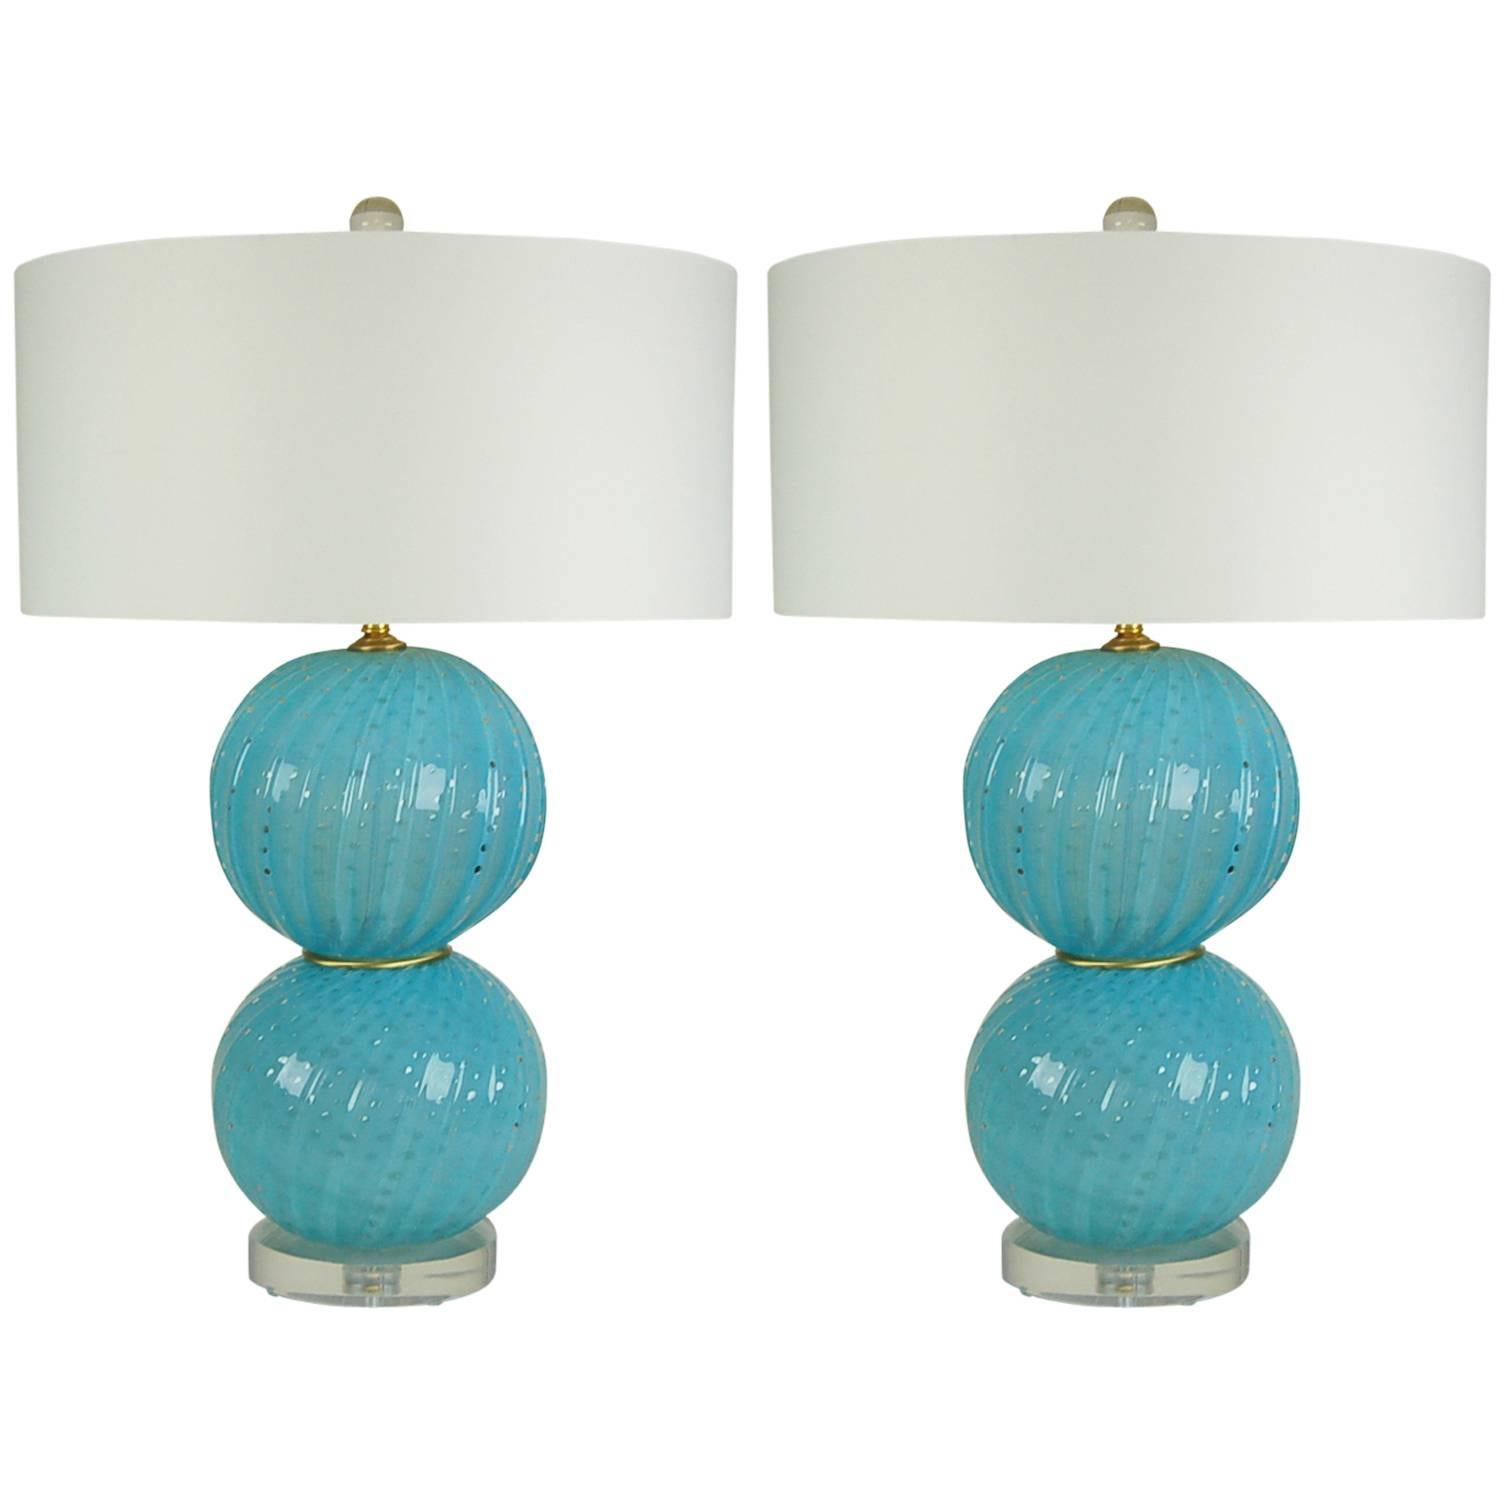 Matched Pair of Vintage Murano Opaline Ball Table Lamps in Blue For Sale